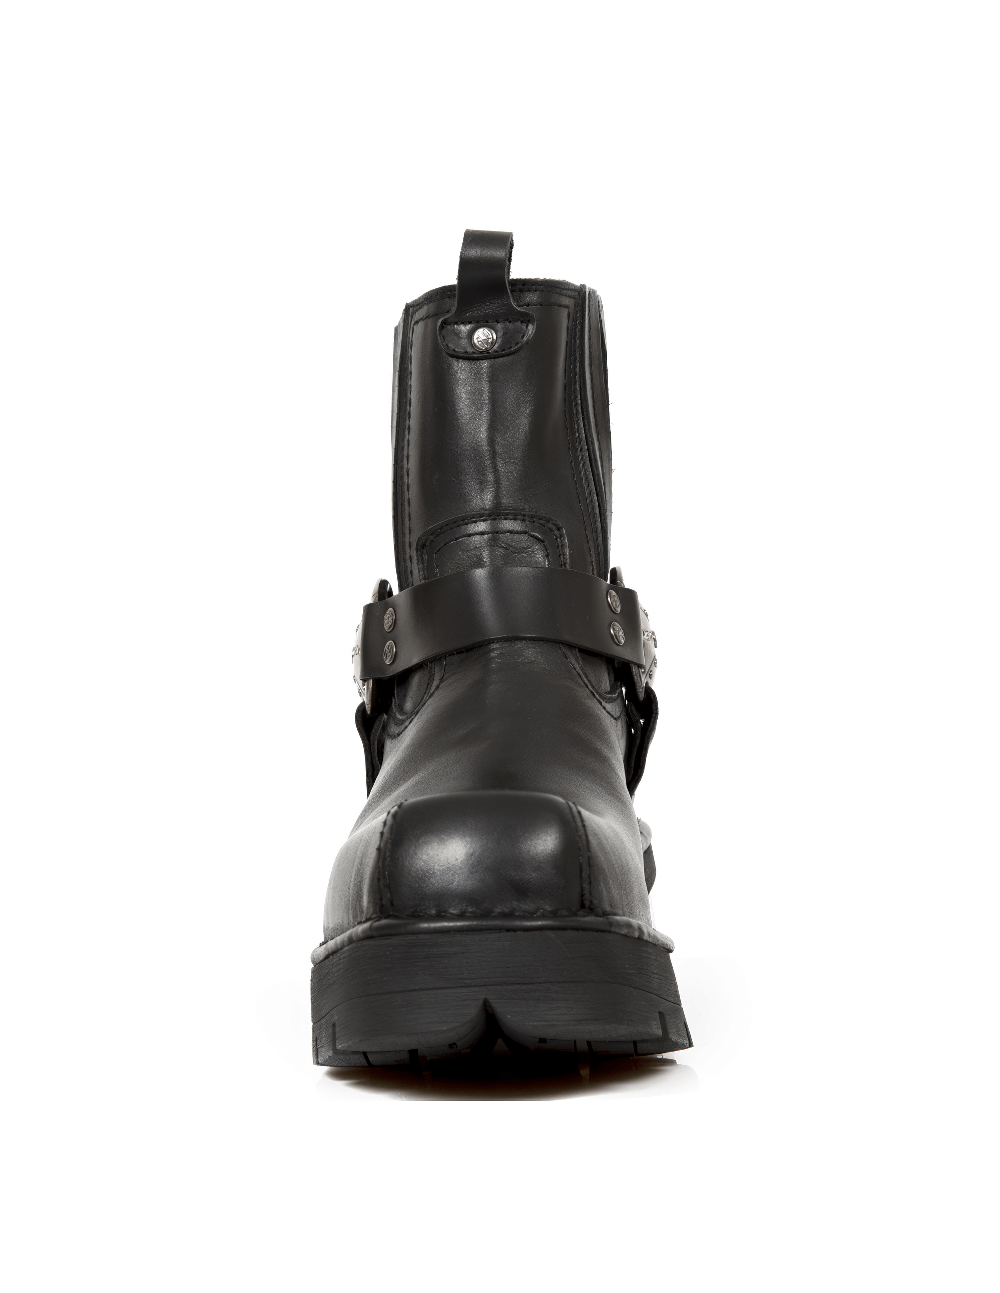 NEW ROCK Biker Style Black Leather Ankle Boots